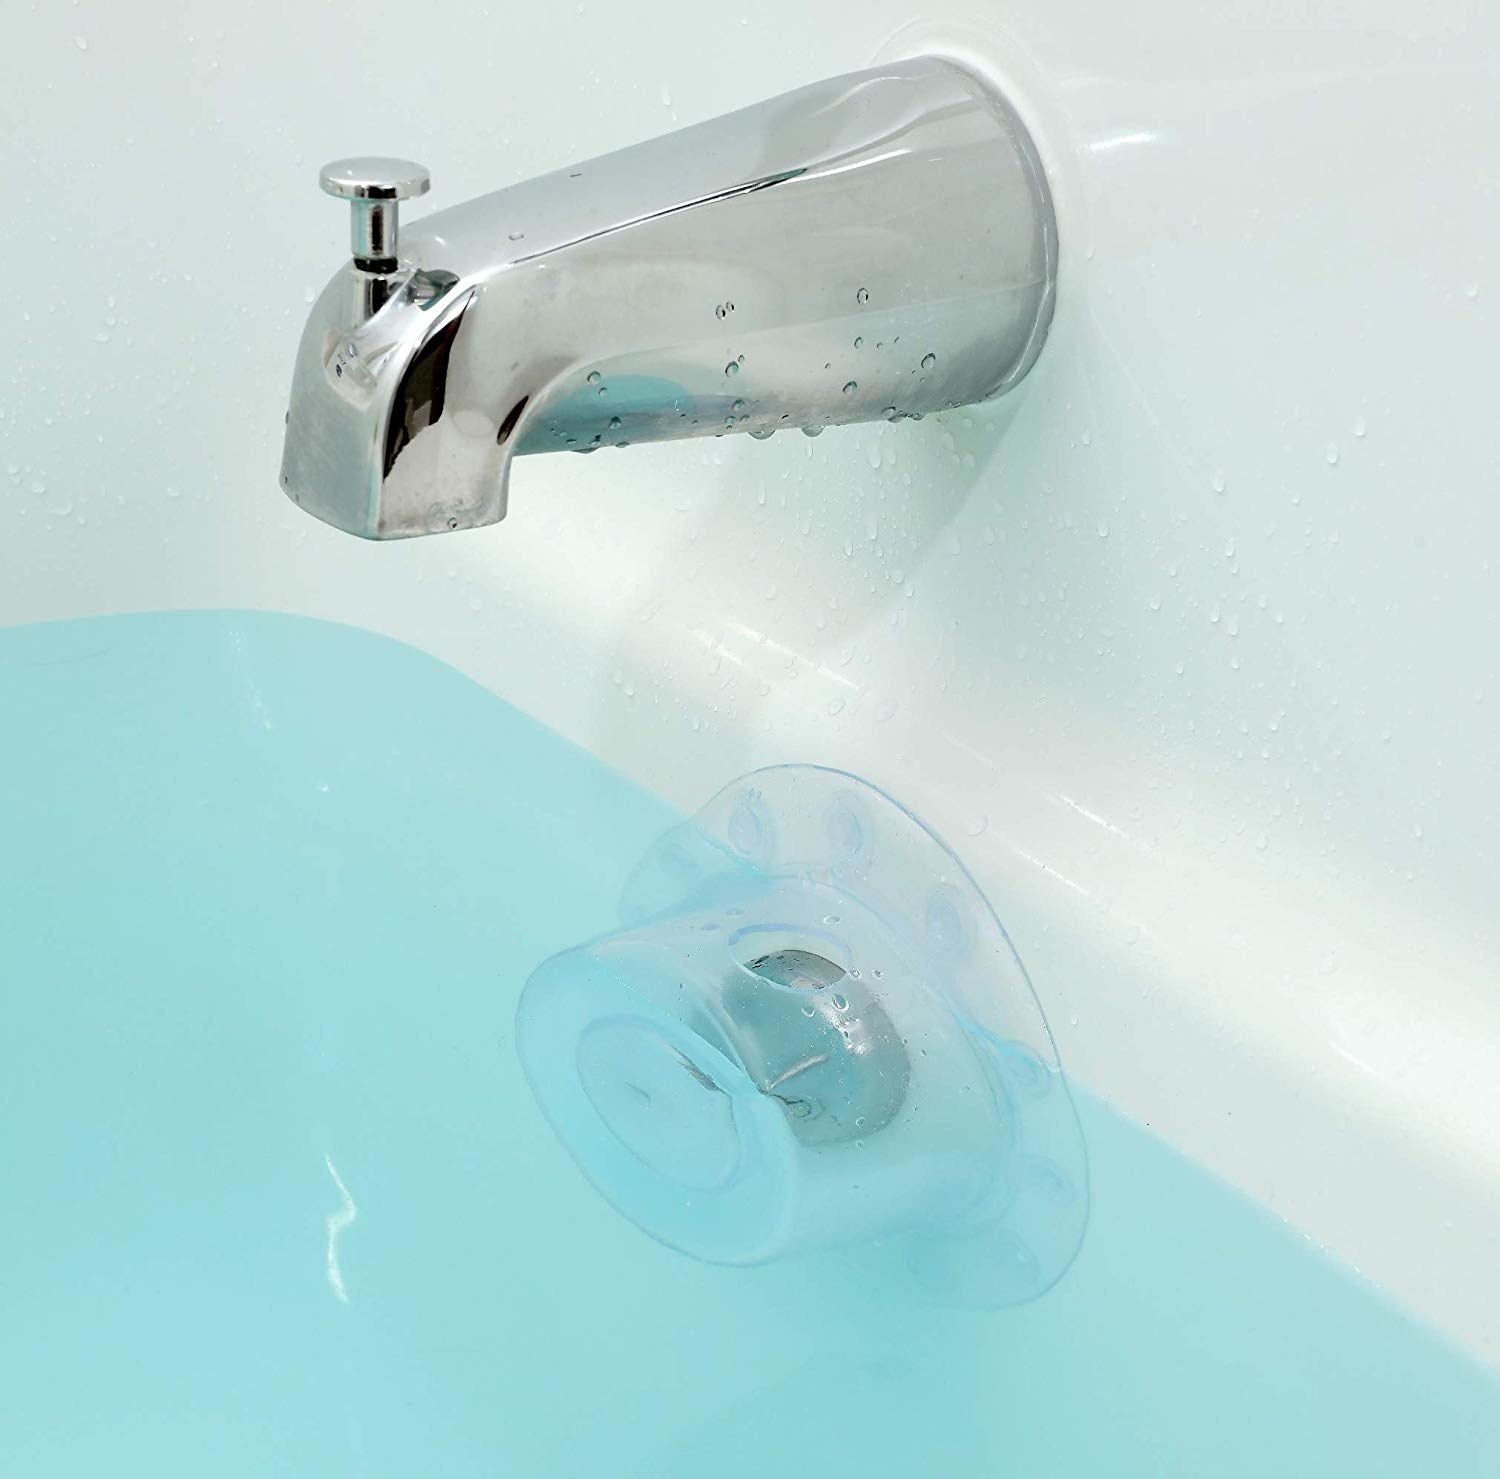 A round plastic cover placed over an overflow drain in the bathtub